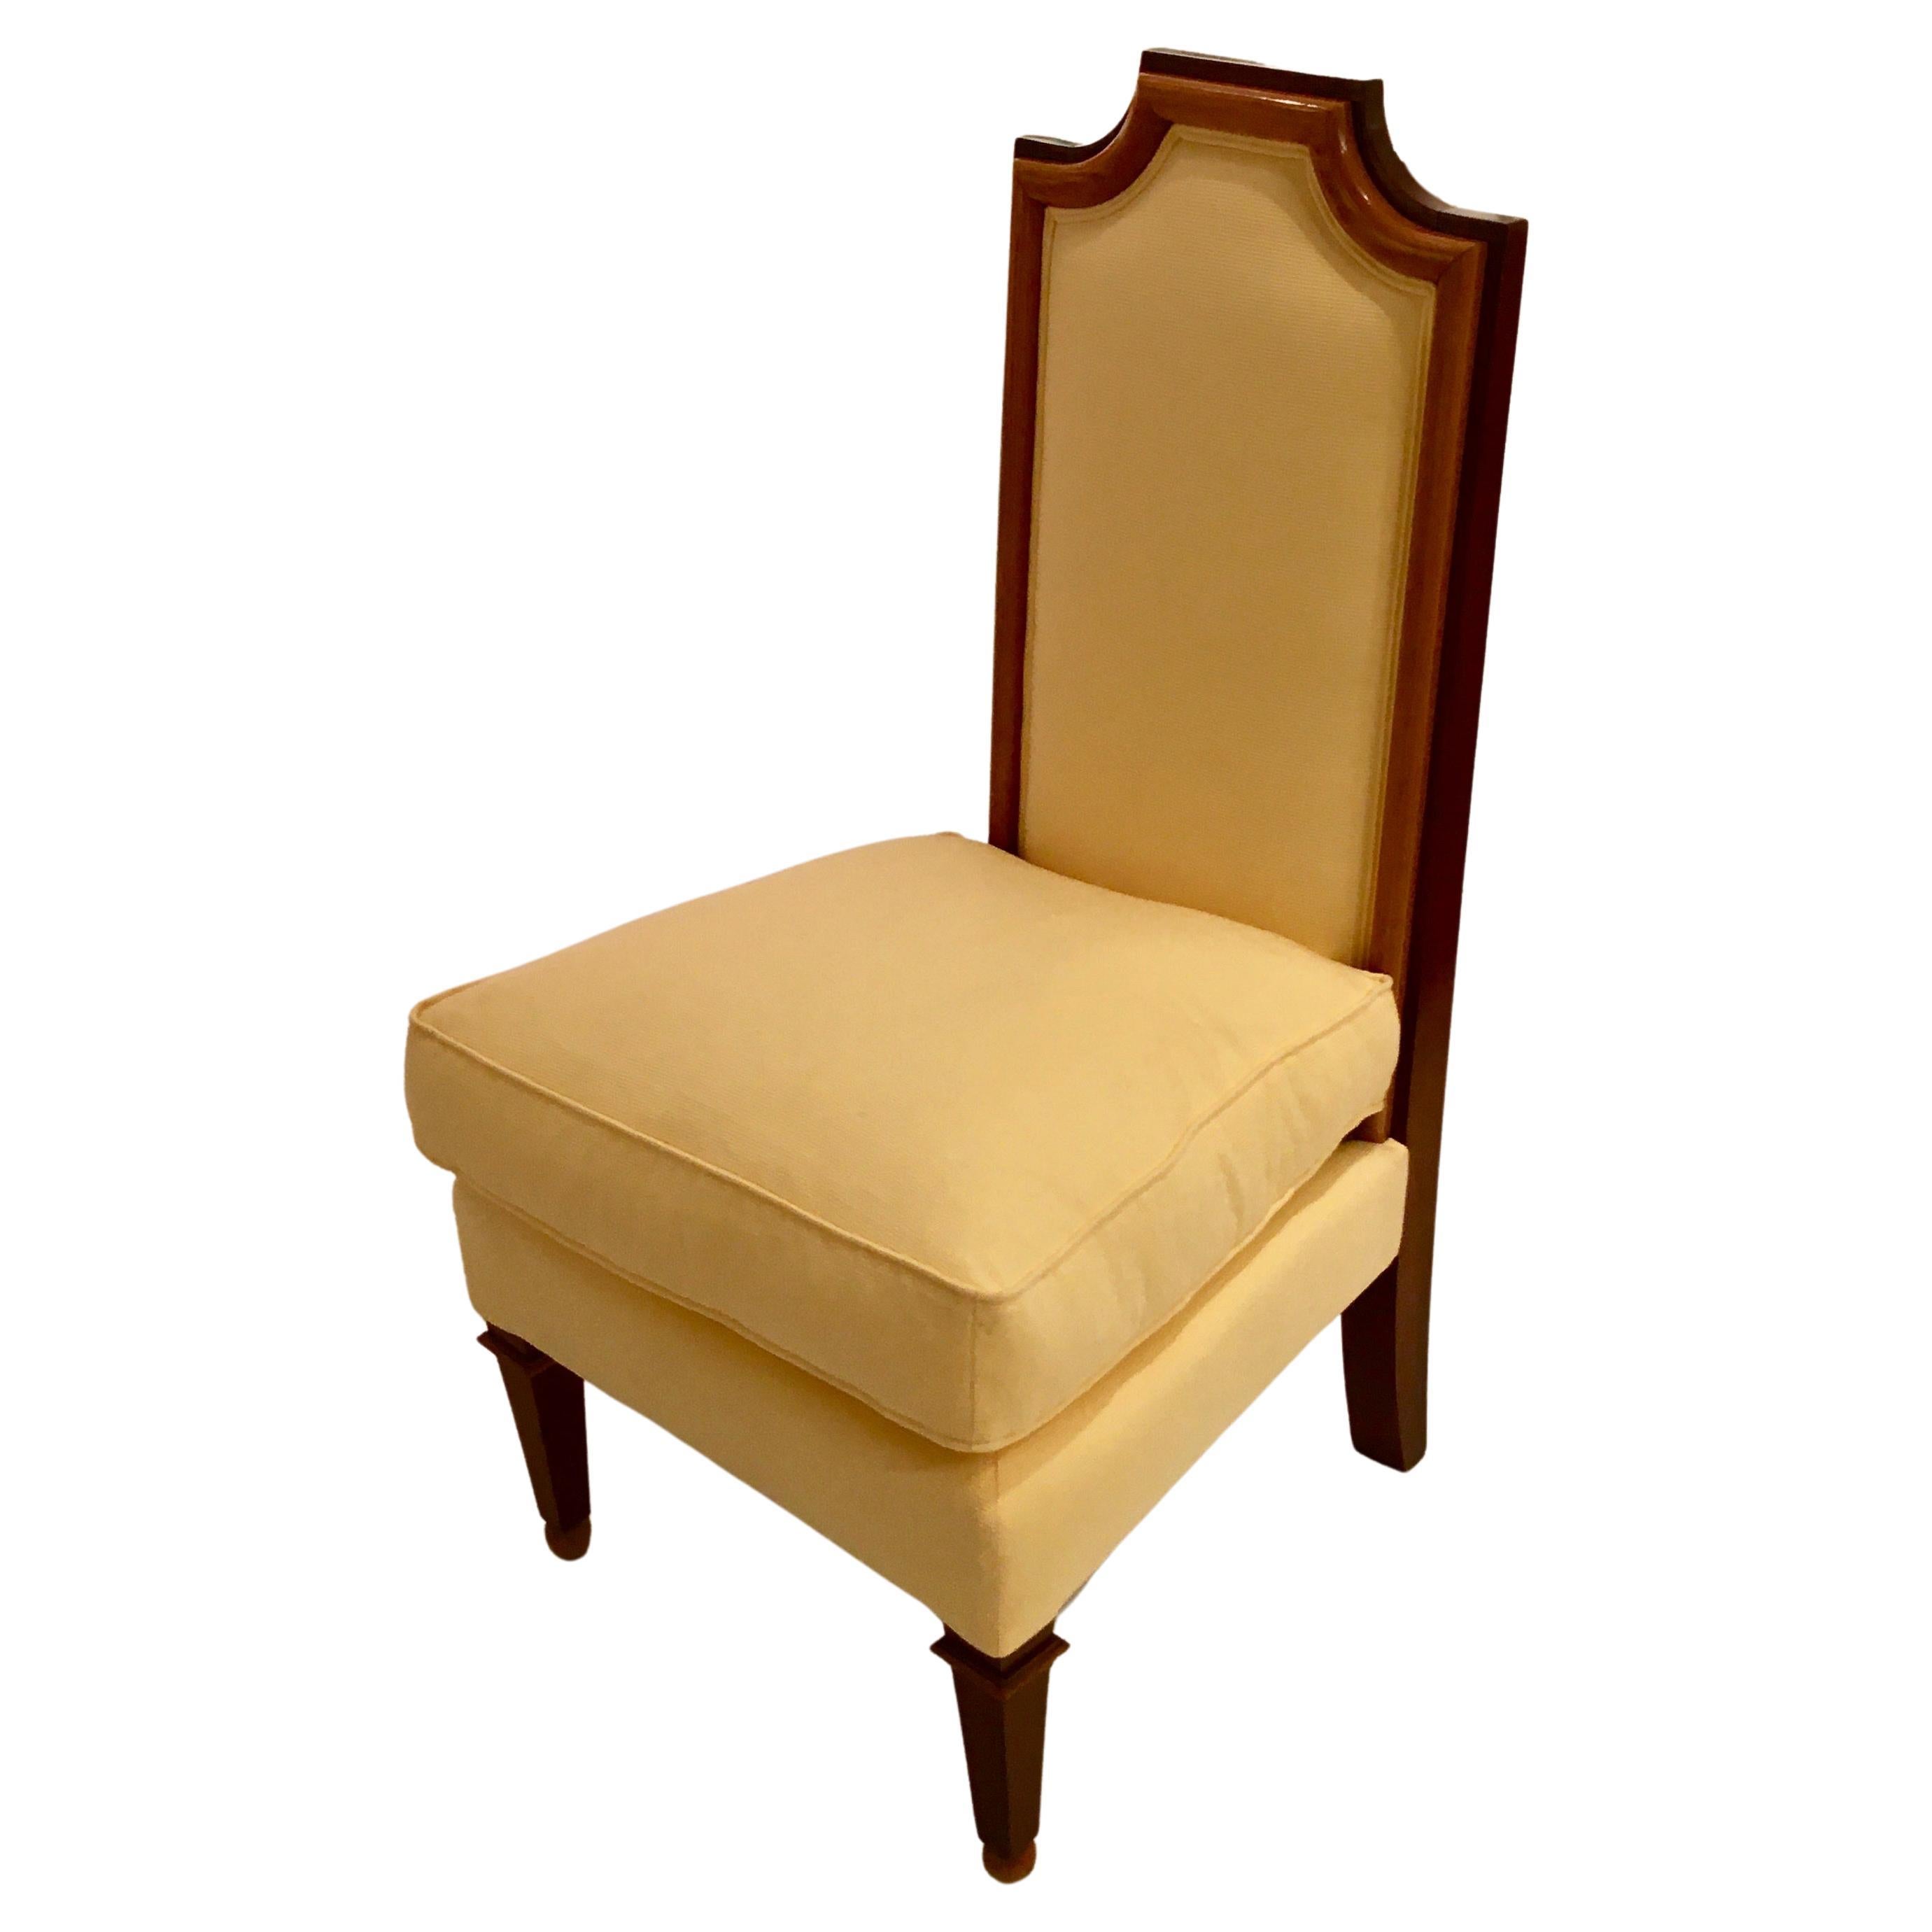 Elegant Neoclassical Chair by Jean-Maurice Rothschild, France, 1948 For Sale